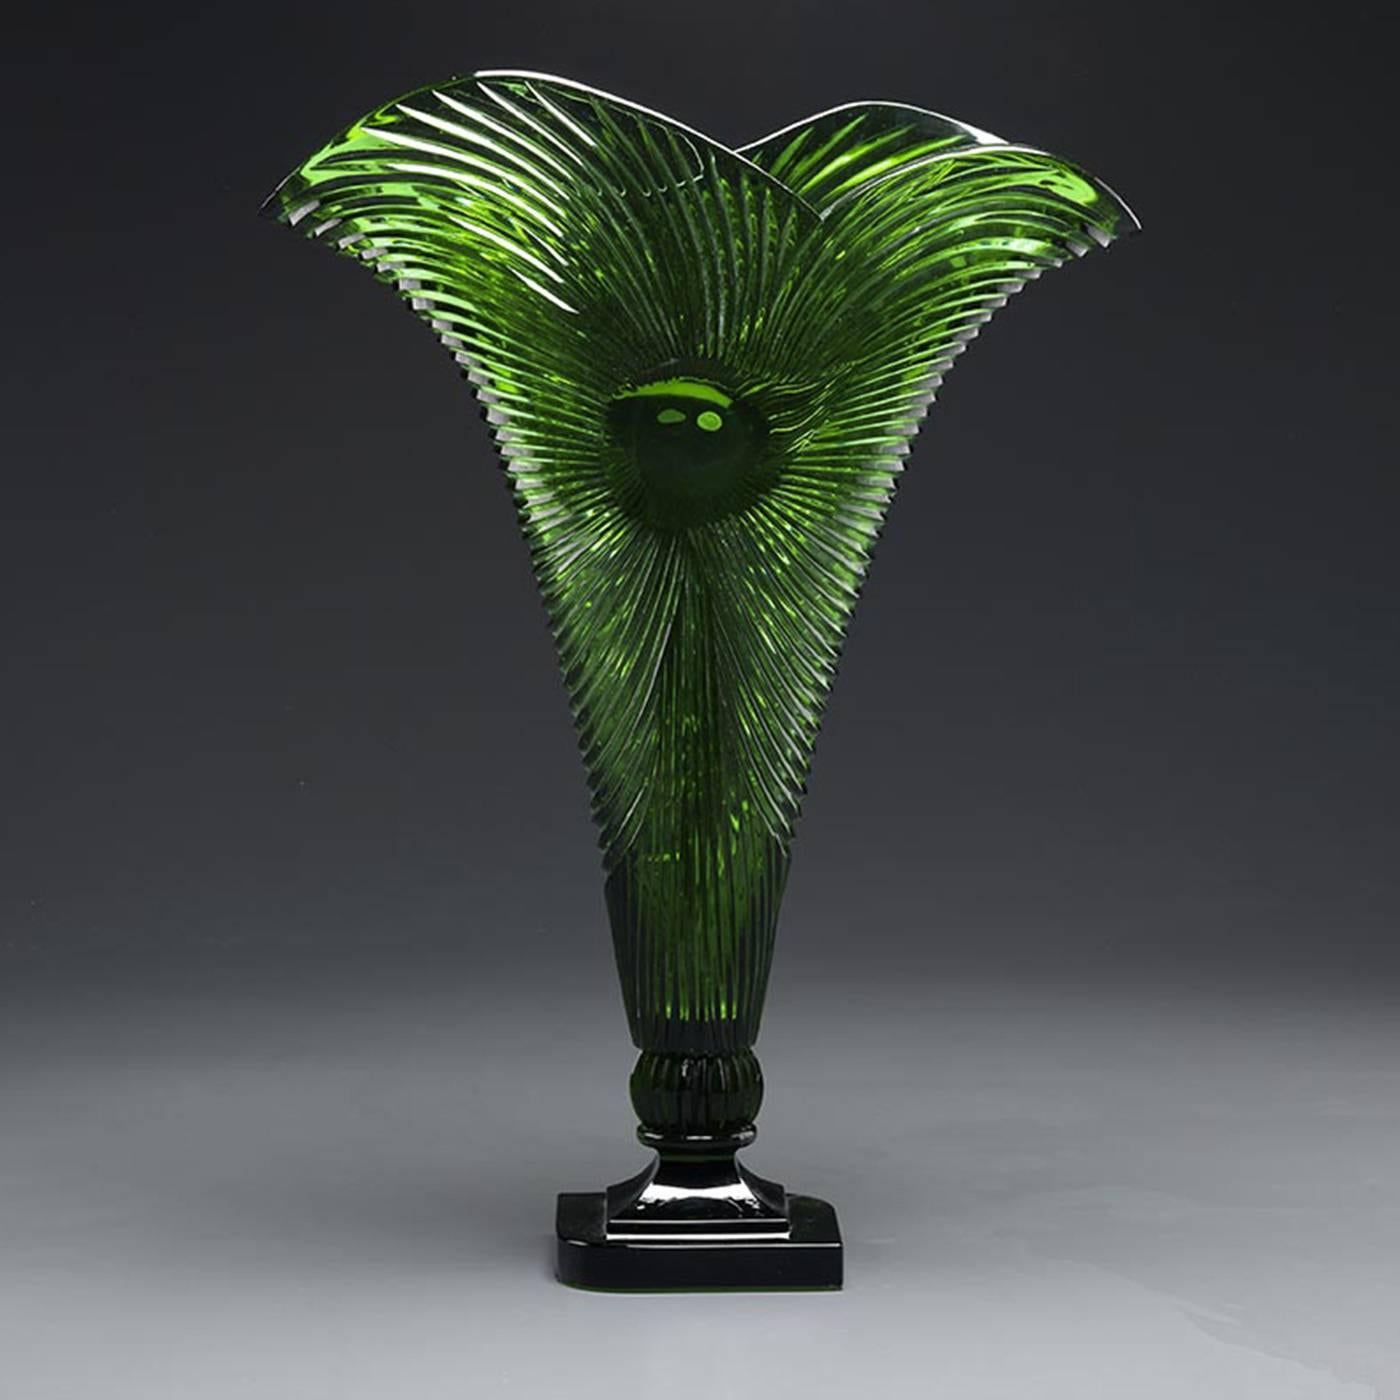 Inspired by art deco designs, this magnificent blown crystal vase is shaped like a fan and features a decoration of vertical ridges and grooves that evoke the silhouette of peacock feathers. Made entirely of the finest crystal with an alluring